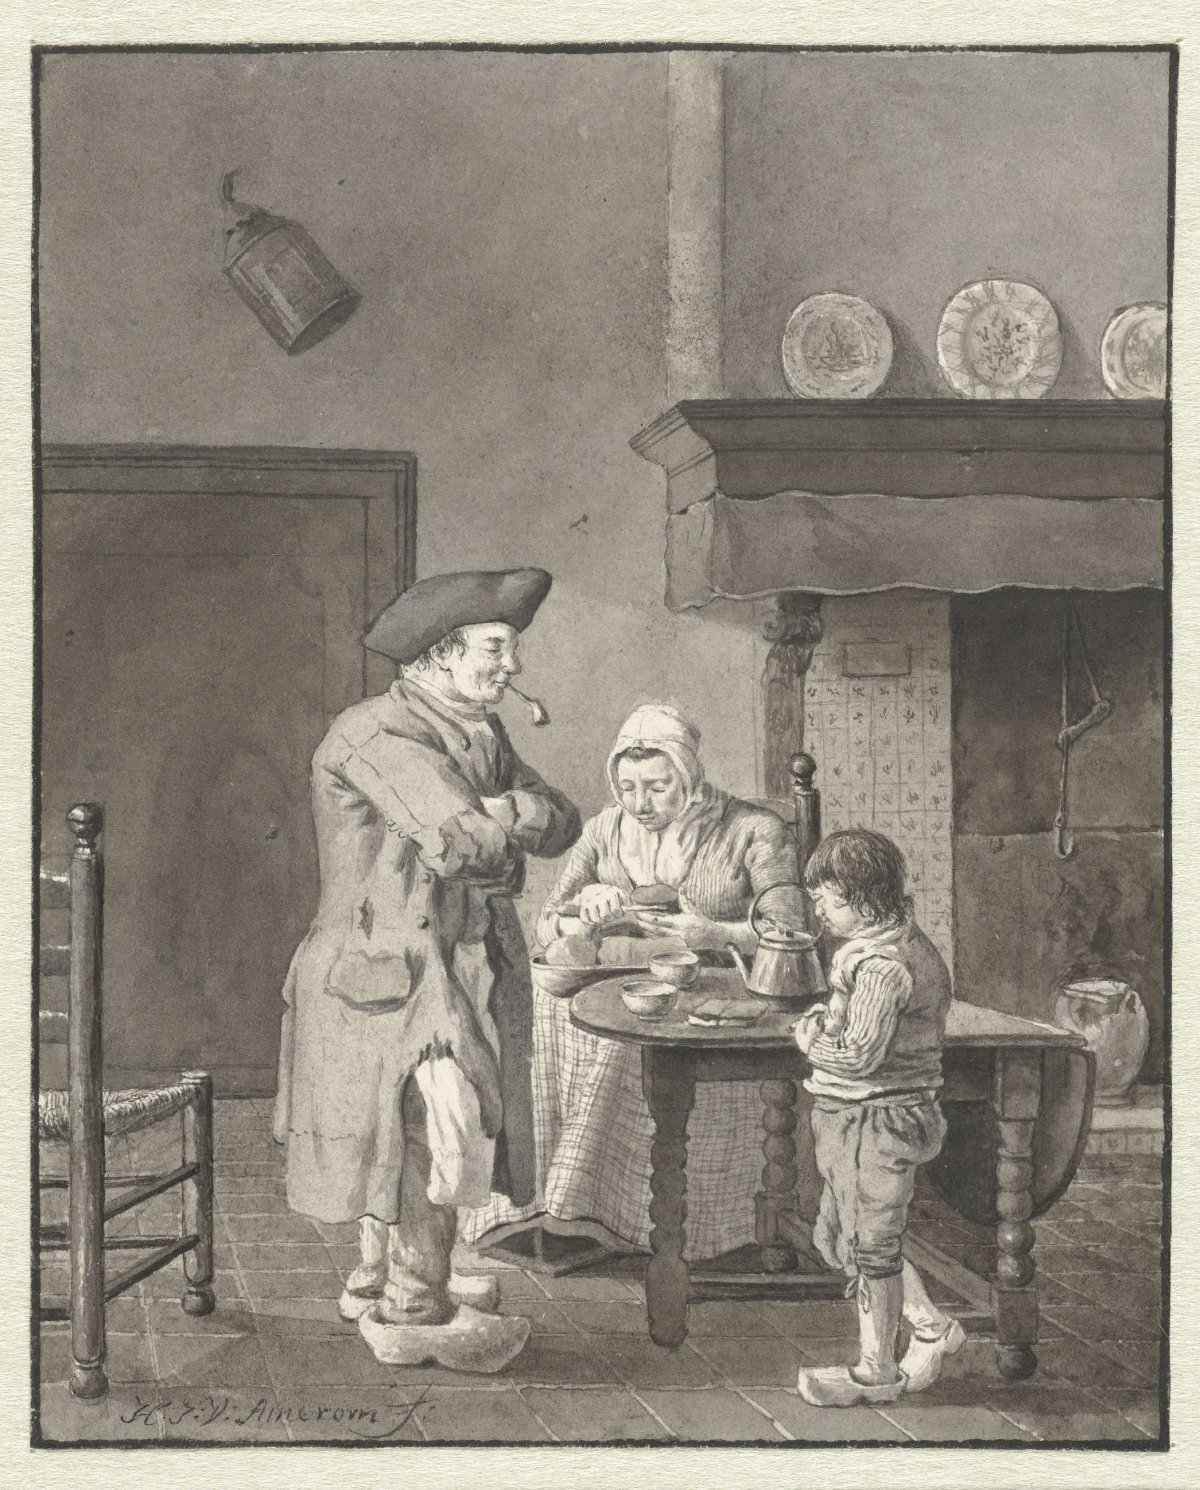 A mother cuts bread for her husband and son, Hendrik Jan van Amerom, 1786 - 1833